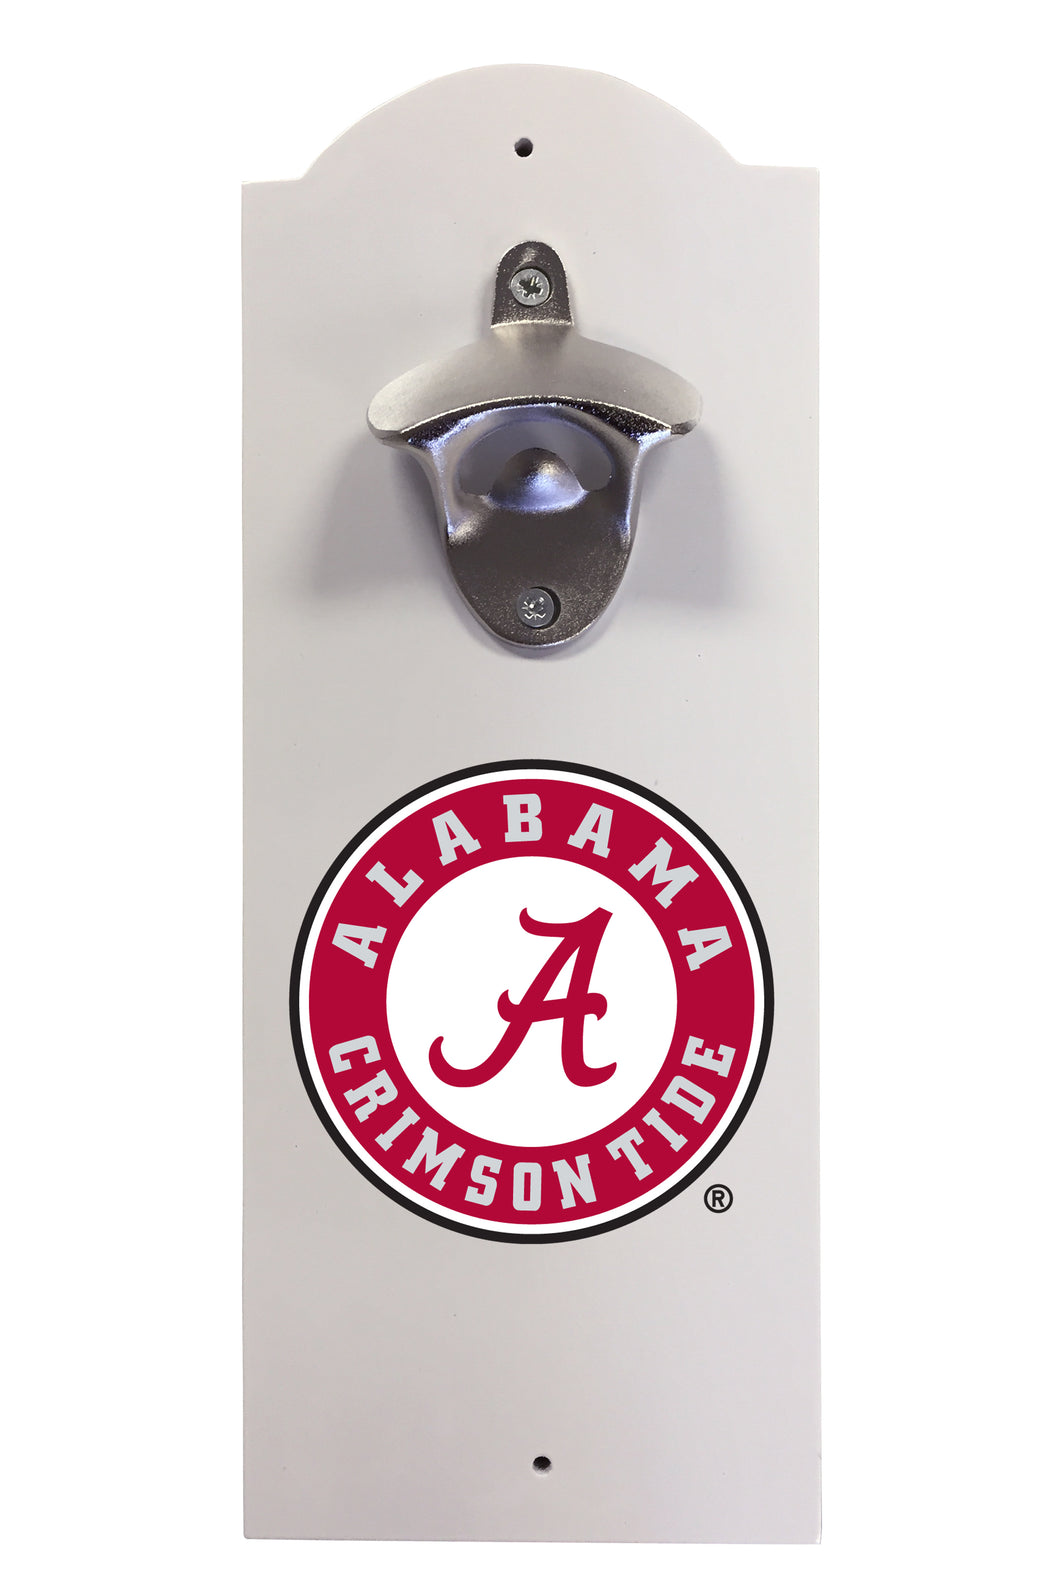 Alabama Crimson Tide Wall-Mounted Bottle Opener – Sturdy Metal with Decorative Wood Base for Home Bars, Rec Rooms & Fan Caves